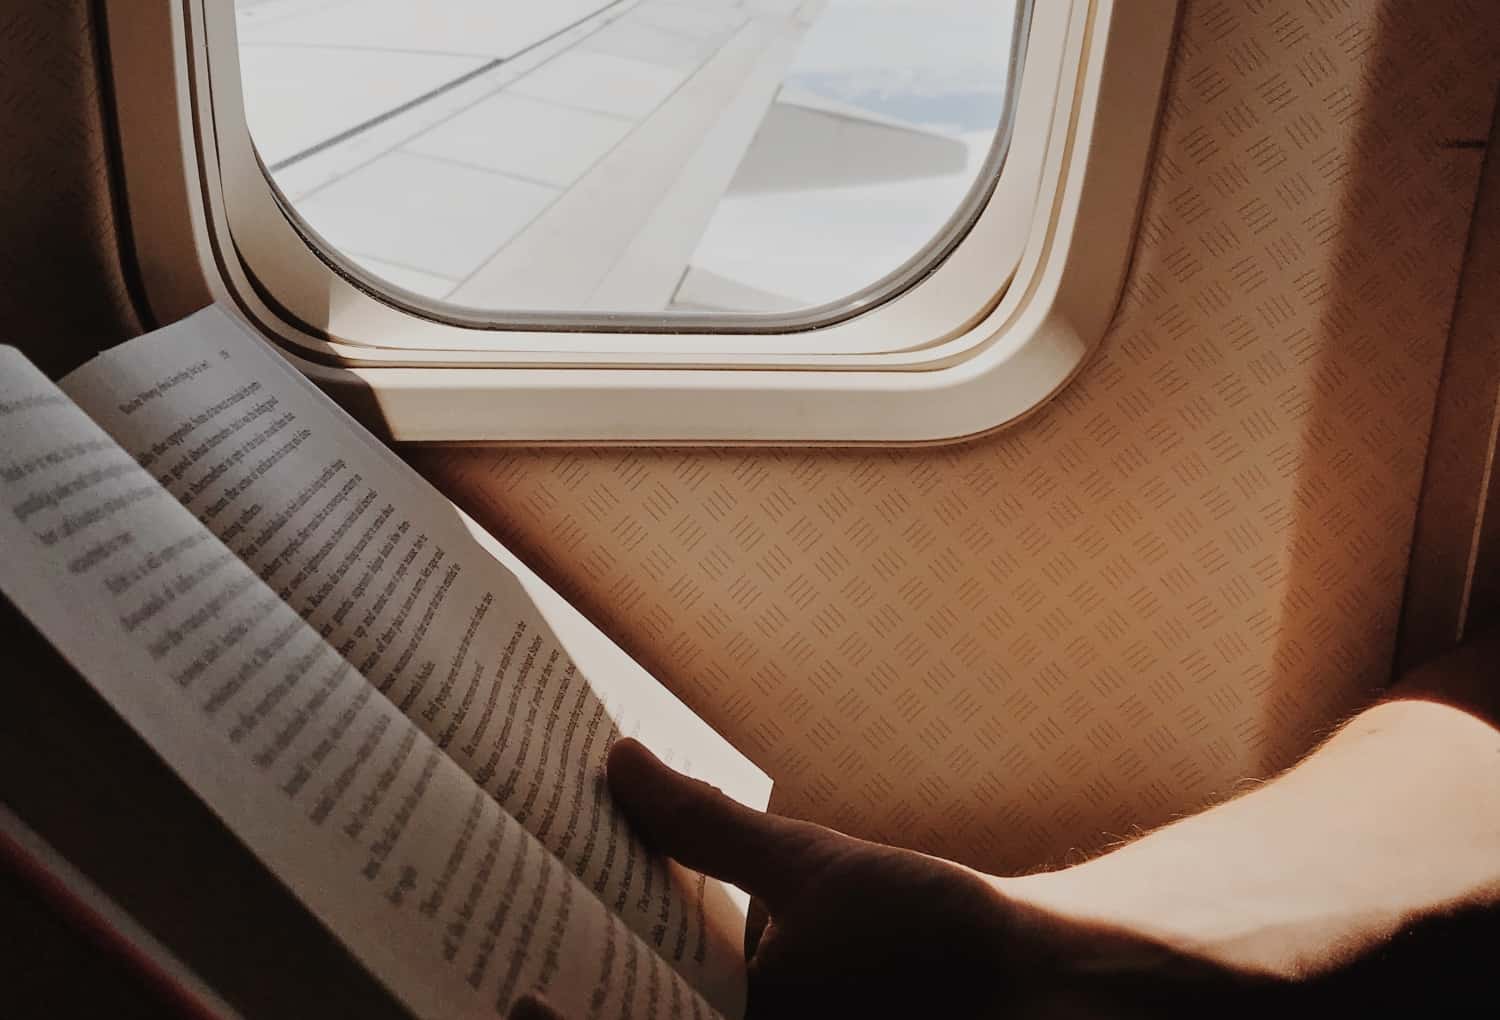 reading on a plane